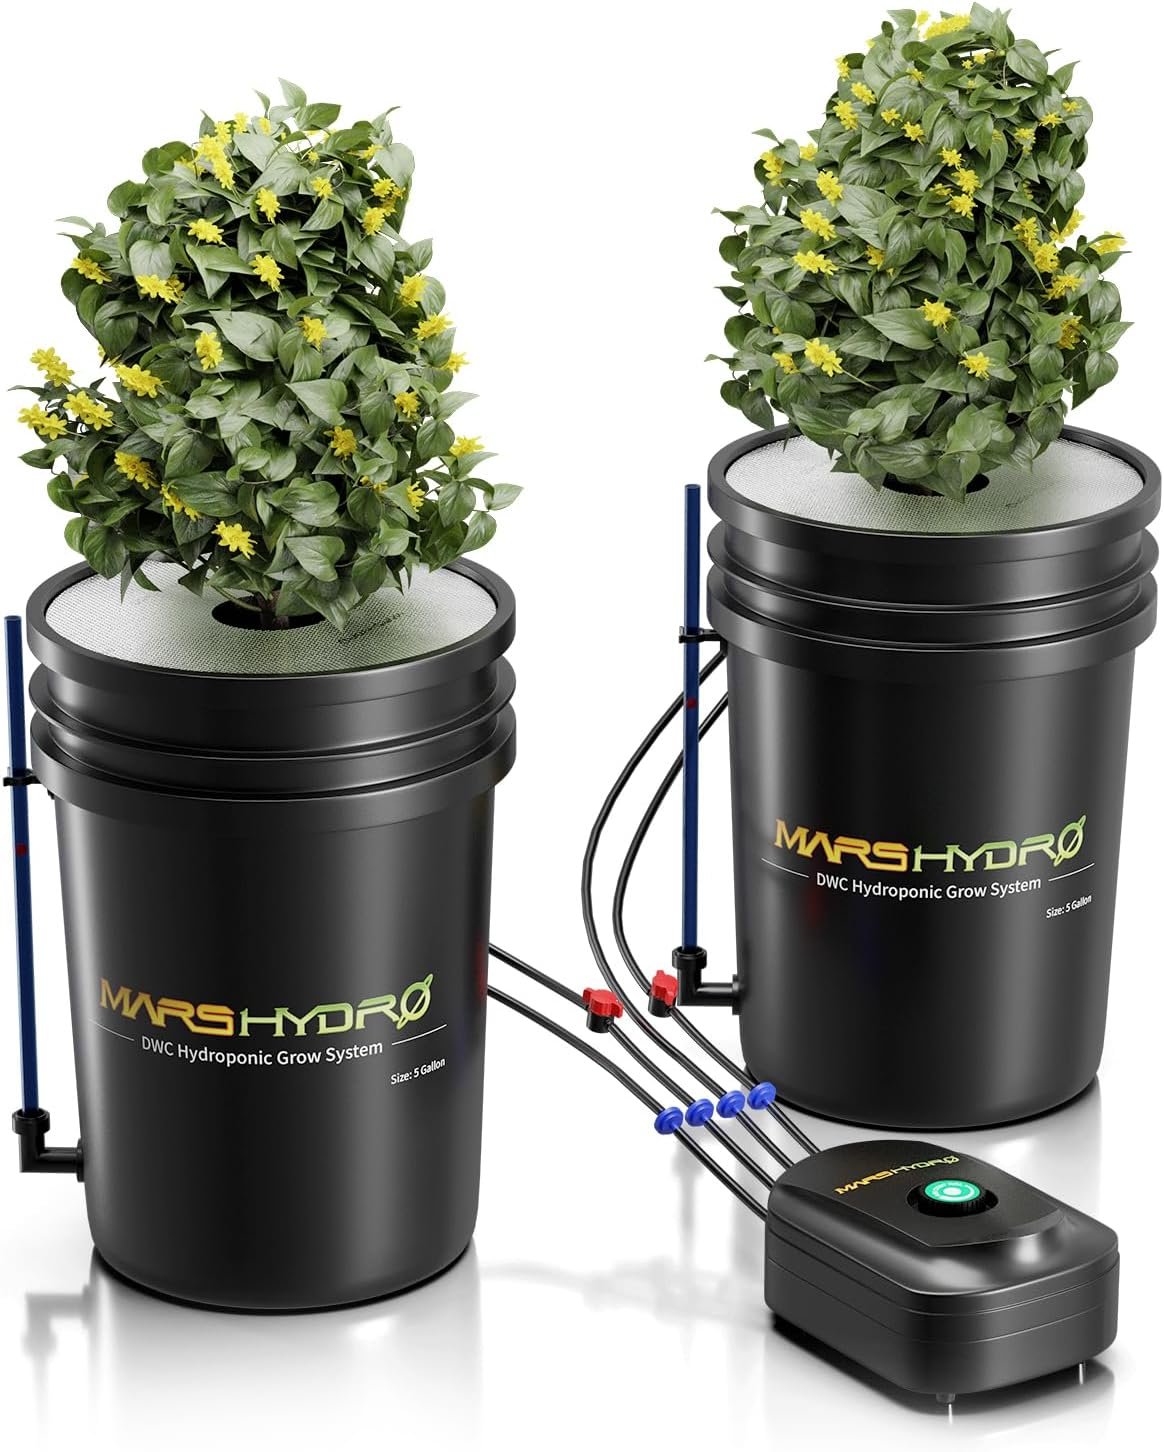 Mars Hydro DWC Hydroponics Grow System 5 Gallon Deep Water Culture with 8W Air Pump, Multi-Purpose Air Hose, Air Stone, 2 Buckets and Top Drip Kit